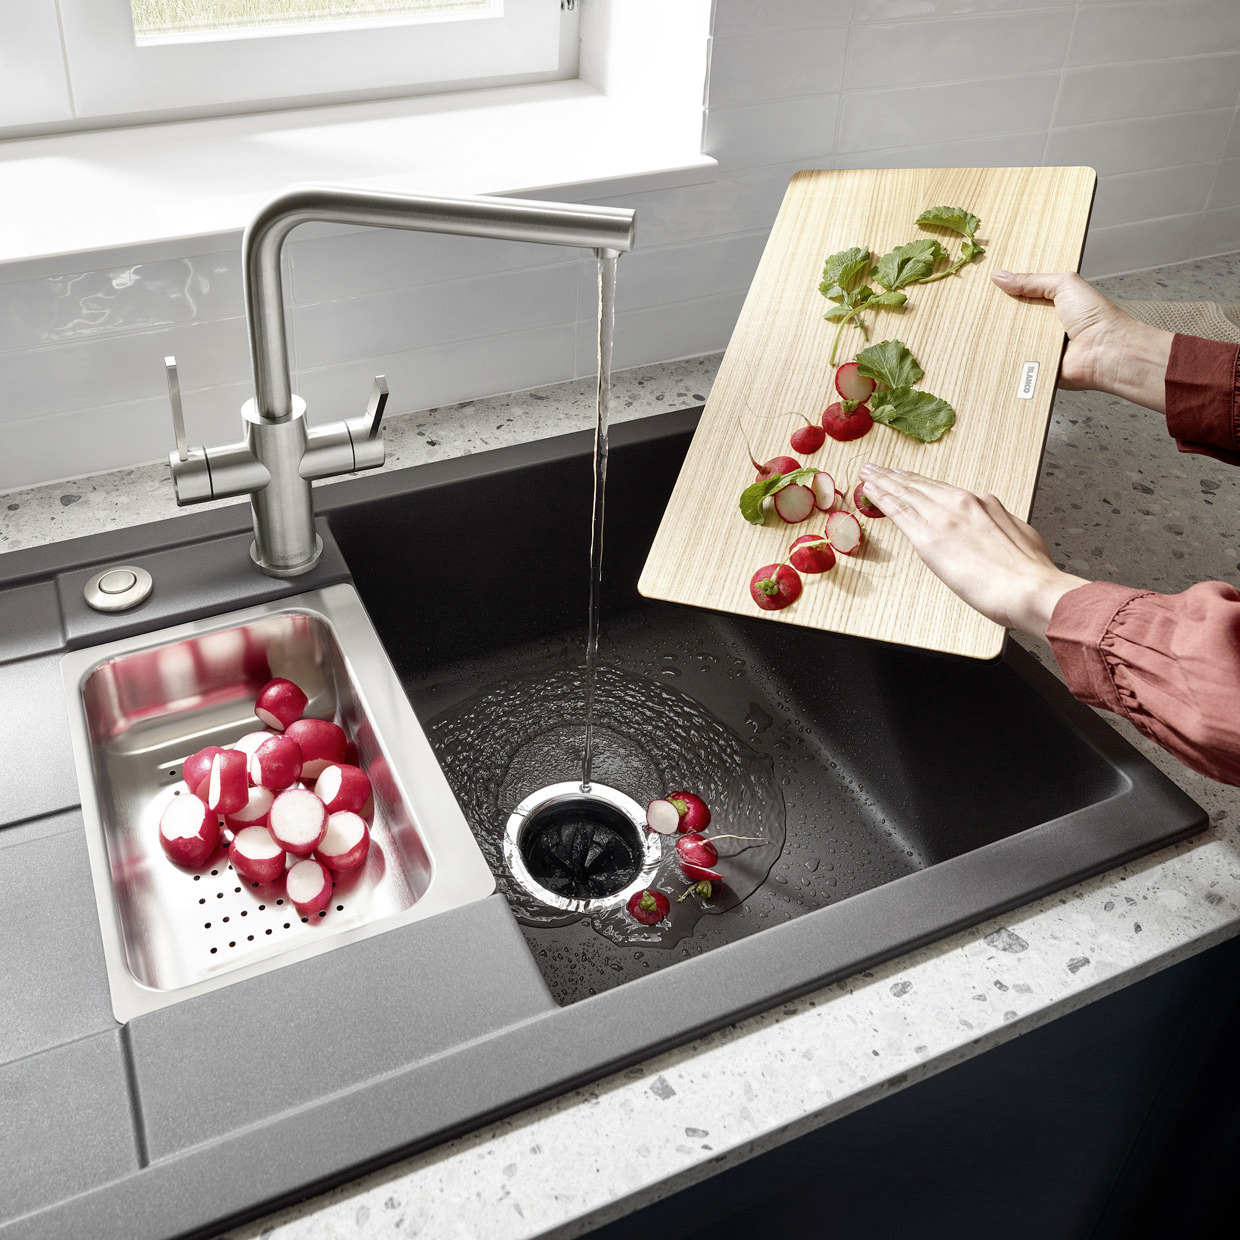 Top Benefits of Using a Food Waste Disposer